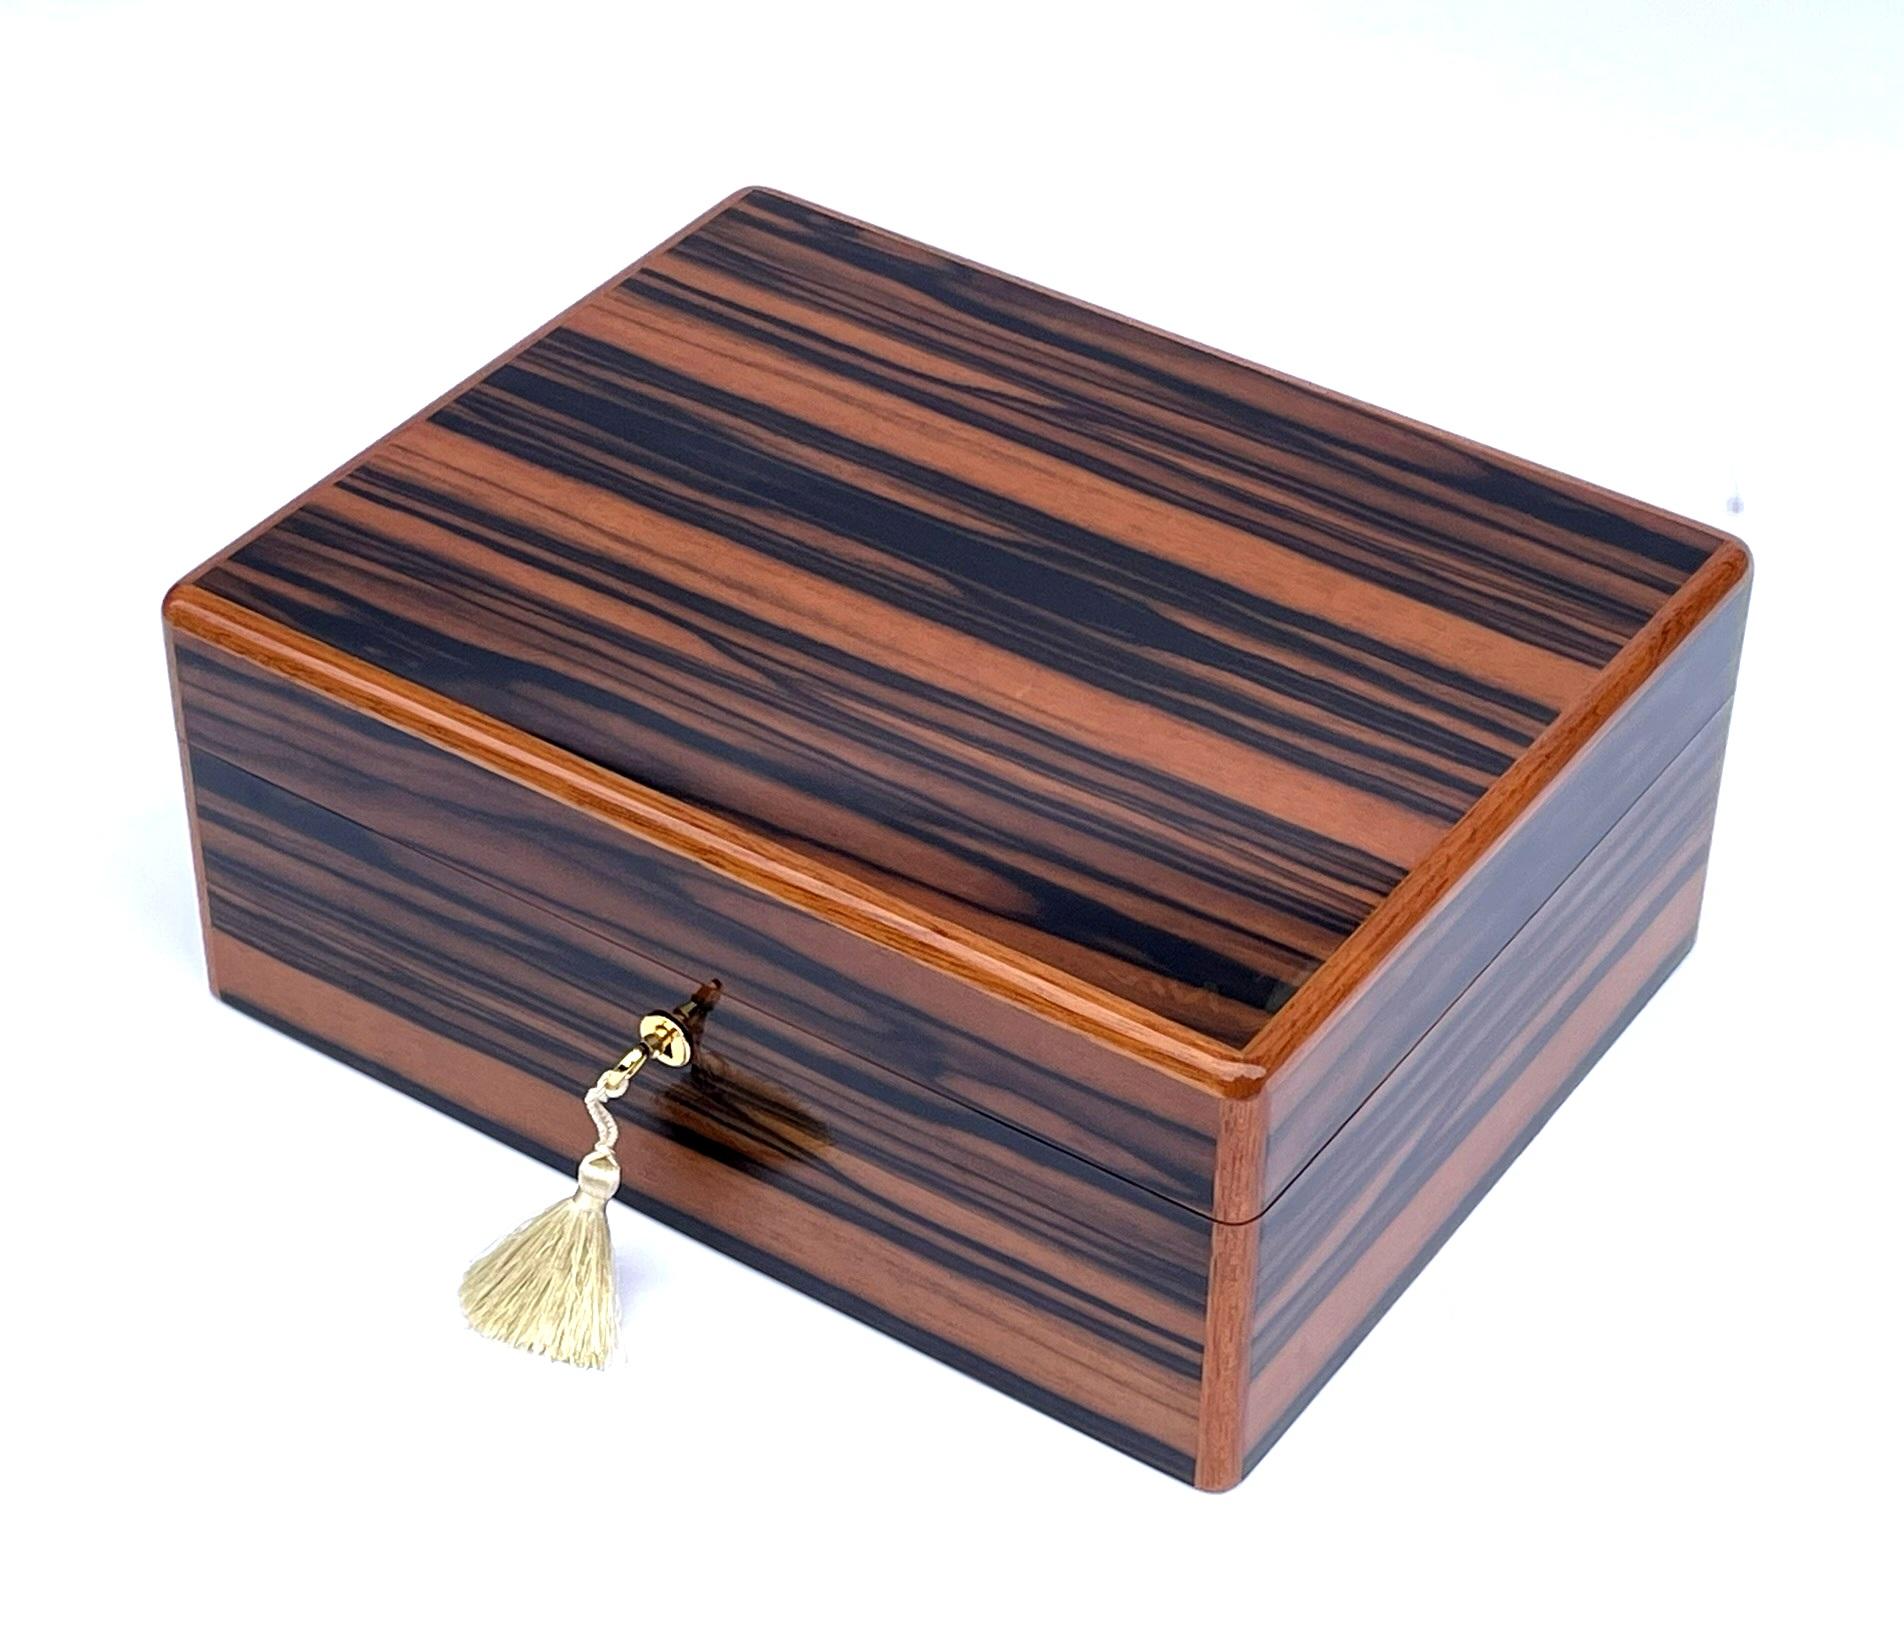 Stunning Macassar Ebony Ladys or Gentlemans Jewellery Casket was manufactured by the famed Manning  Co. of Ireland  and is truly a jewel of handcrafted genius. This box is constructed of the finest woods available and the knowledge and skill of 4